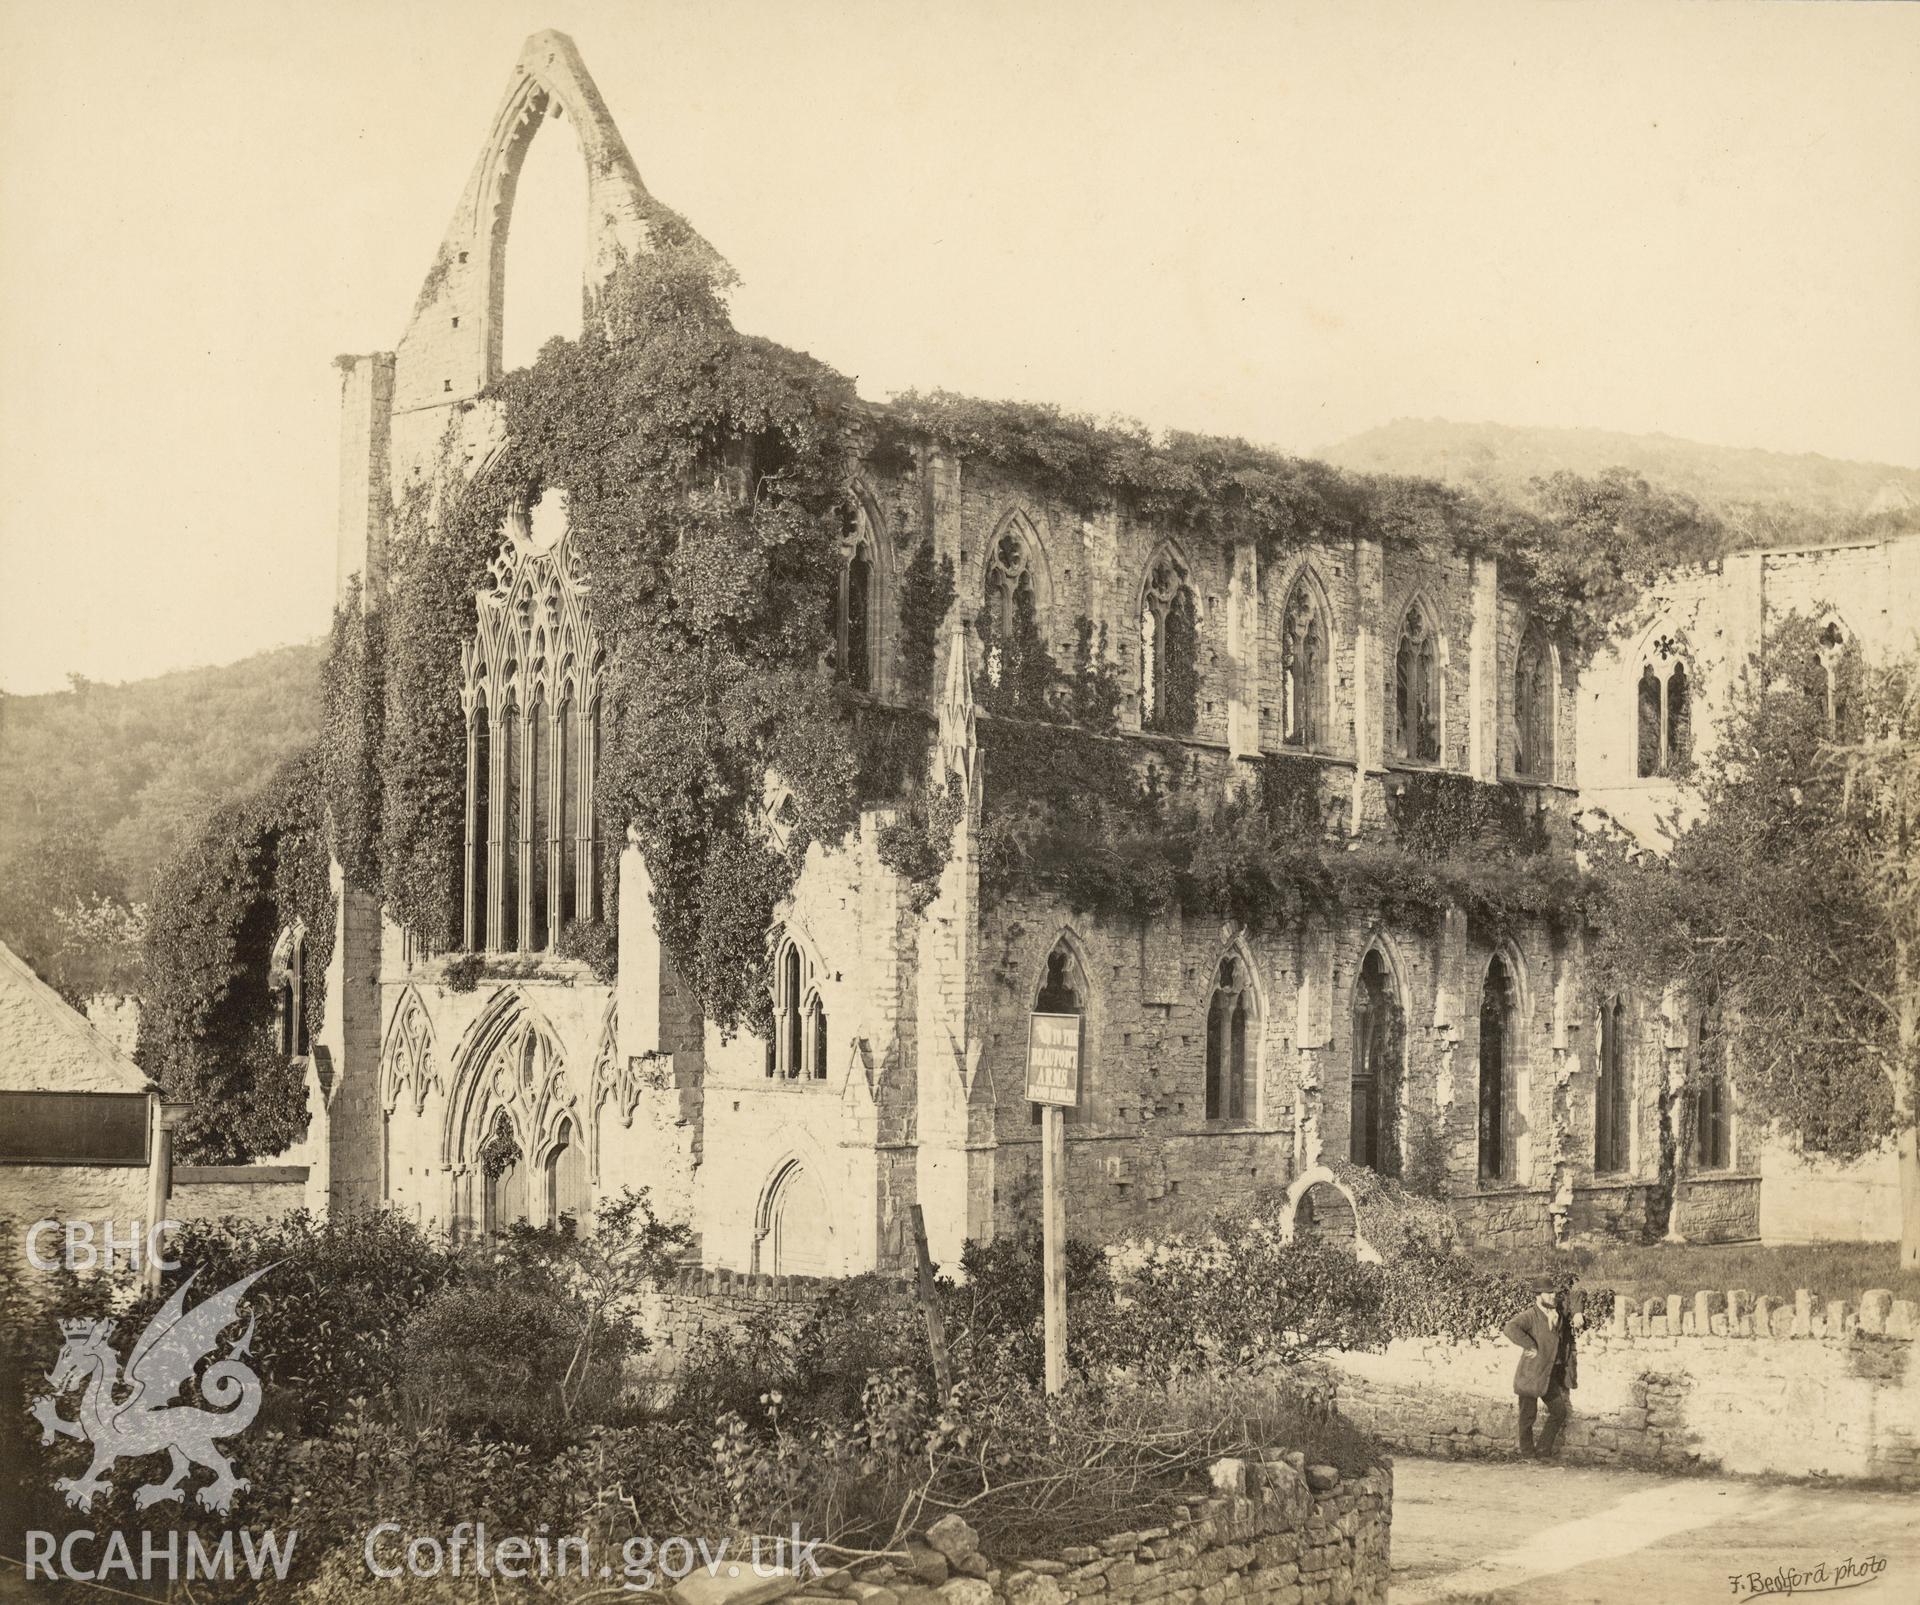 Digital copy of an albumen print showing a general view of Tintern Abbey with figure c1895.